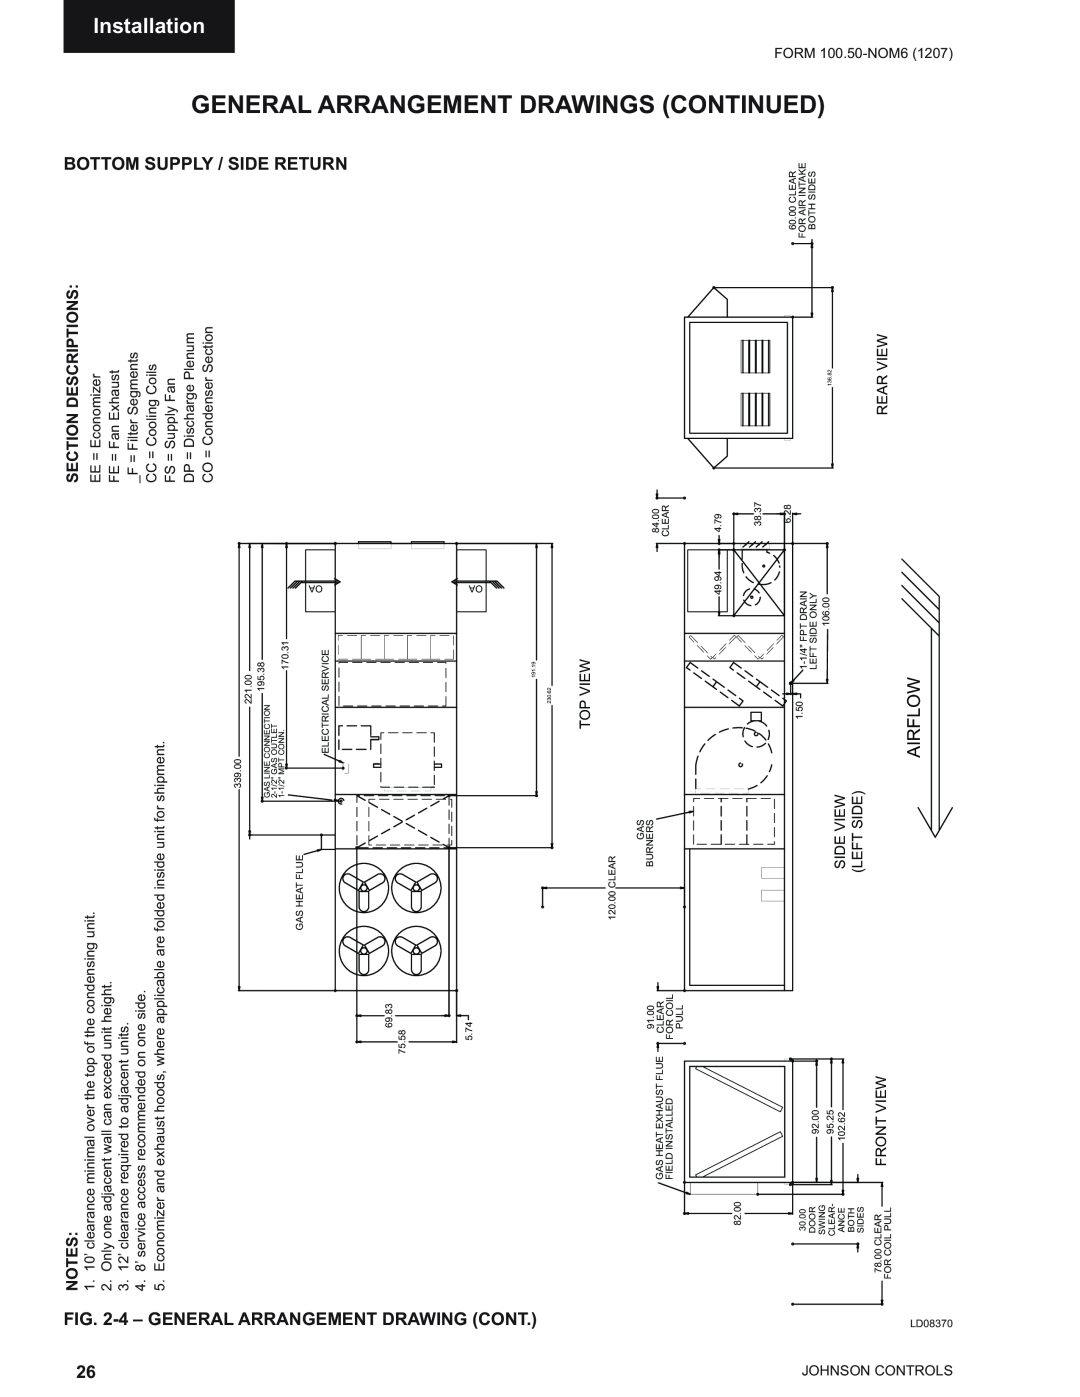 York YPAL 051 Installation, General Arrangement Drawing Cont, Bottom Supply / Side Return, Airflow, Front View 